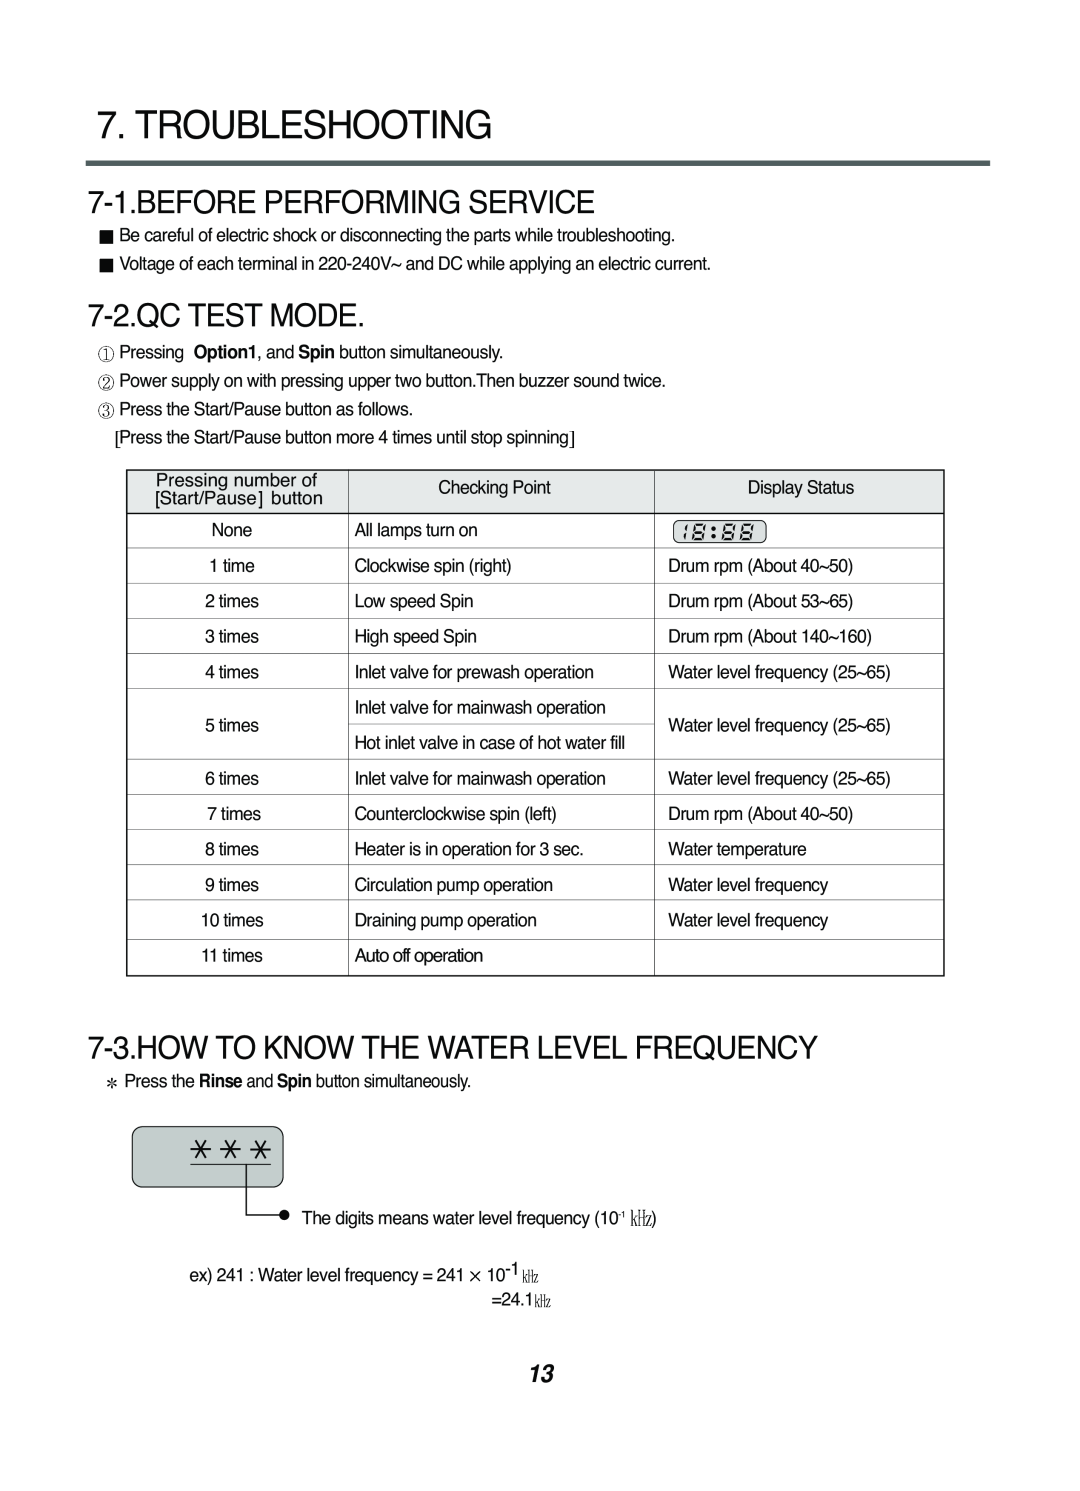 LG Electronics WD(M)-14220(5)FD, WD(M)-10220(5)FD, 16221FD Troubleshooting, Before Performing Service, Qc Test Mode 